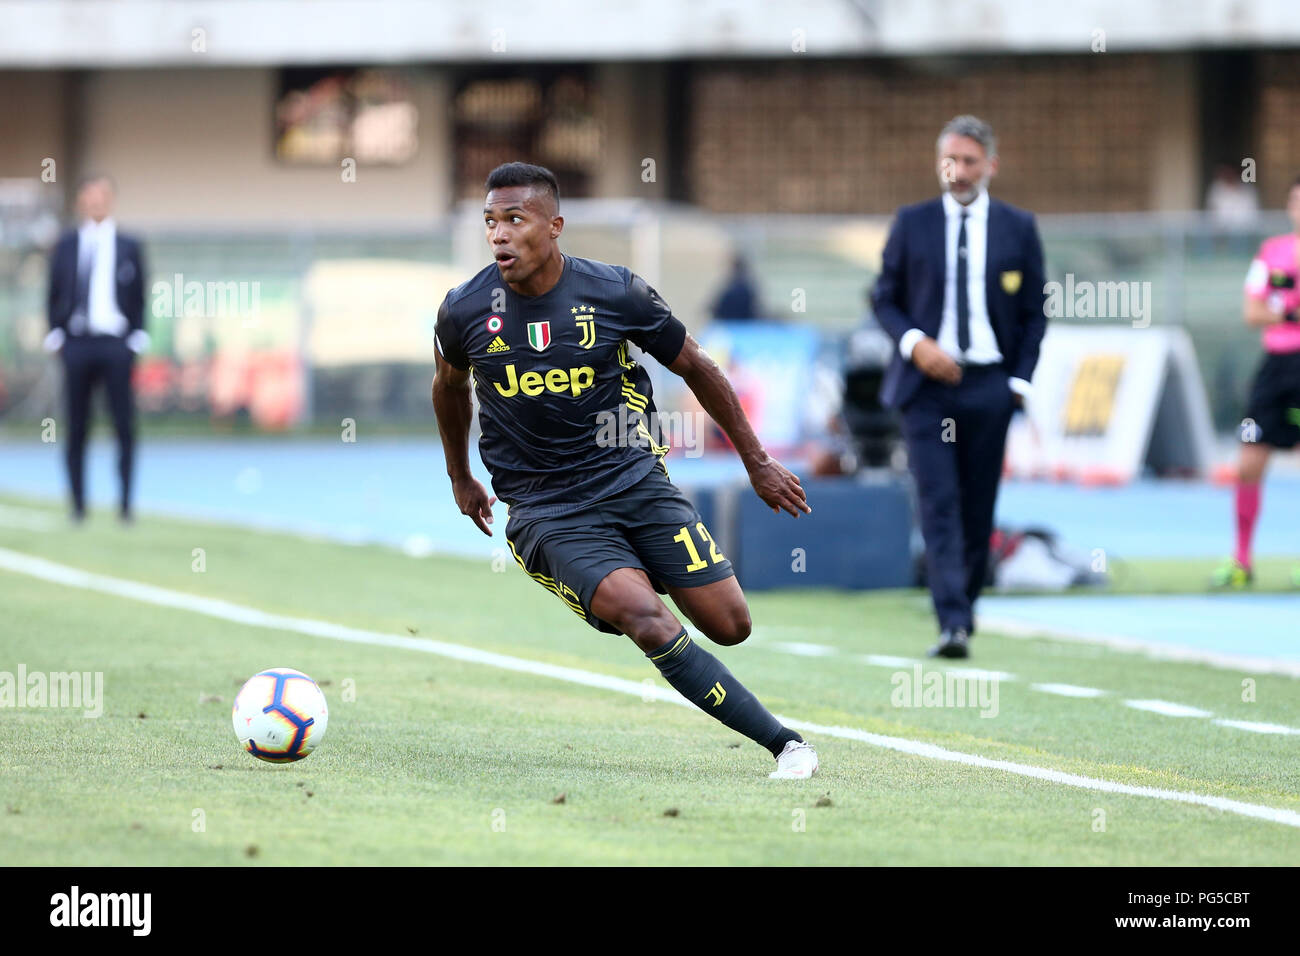 Alex Sandro  of Juventus FC in action during the Serie A football match between Ac Chievo Verona and Juventus Fc. Stock Photo